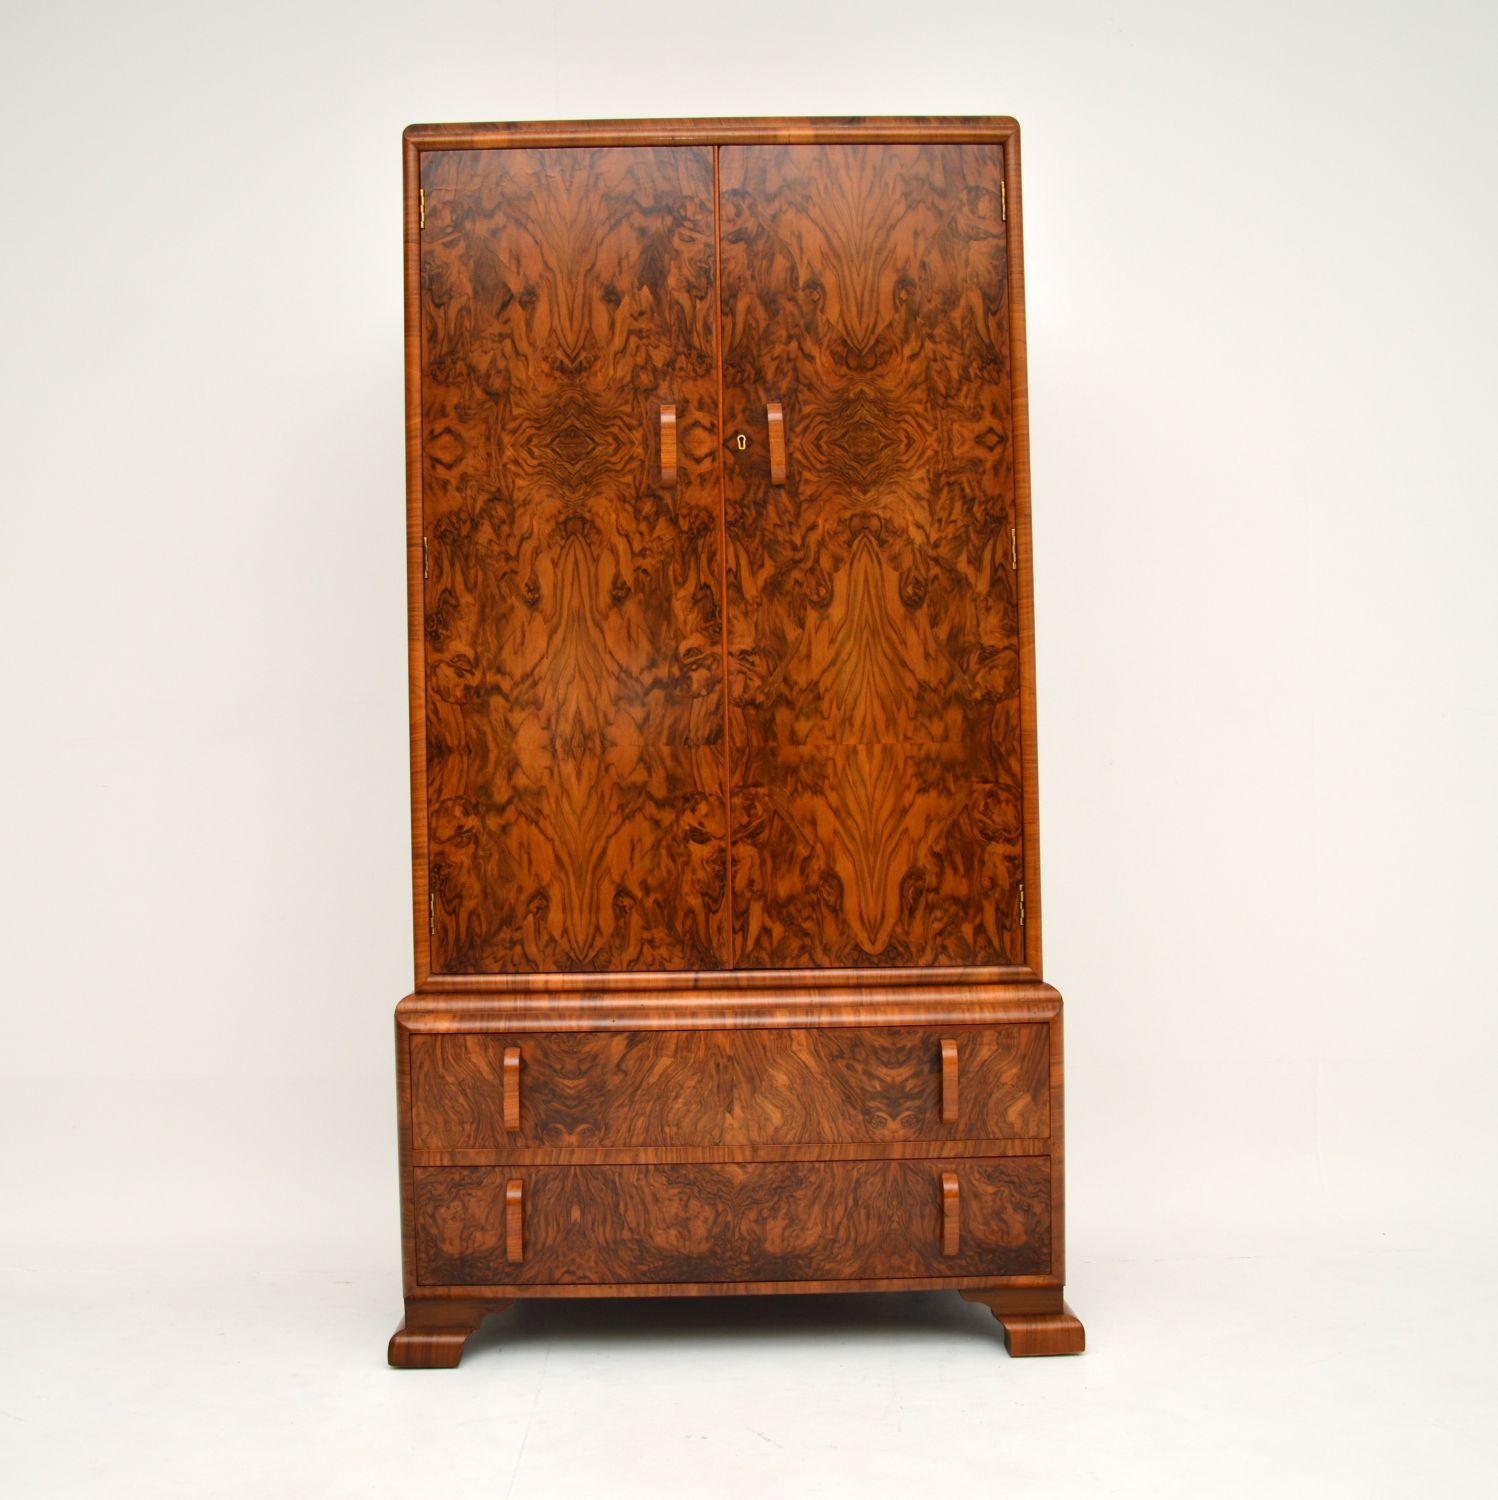 An excellent original Art Deco period wardrobe on chest, beautifully made from burr walnut. This was made in England, it dates from the 1930’s.

The quality is amazing, and this is a very useful size with lots of storage space. The upper cabinet